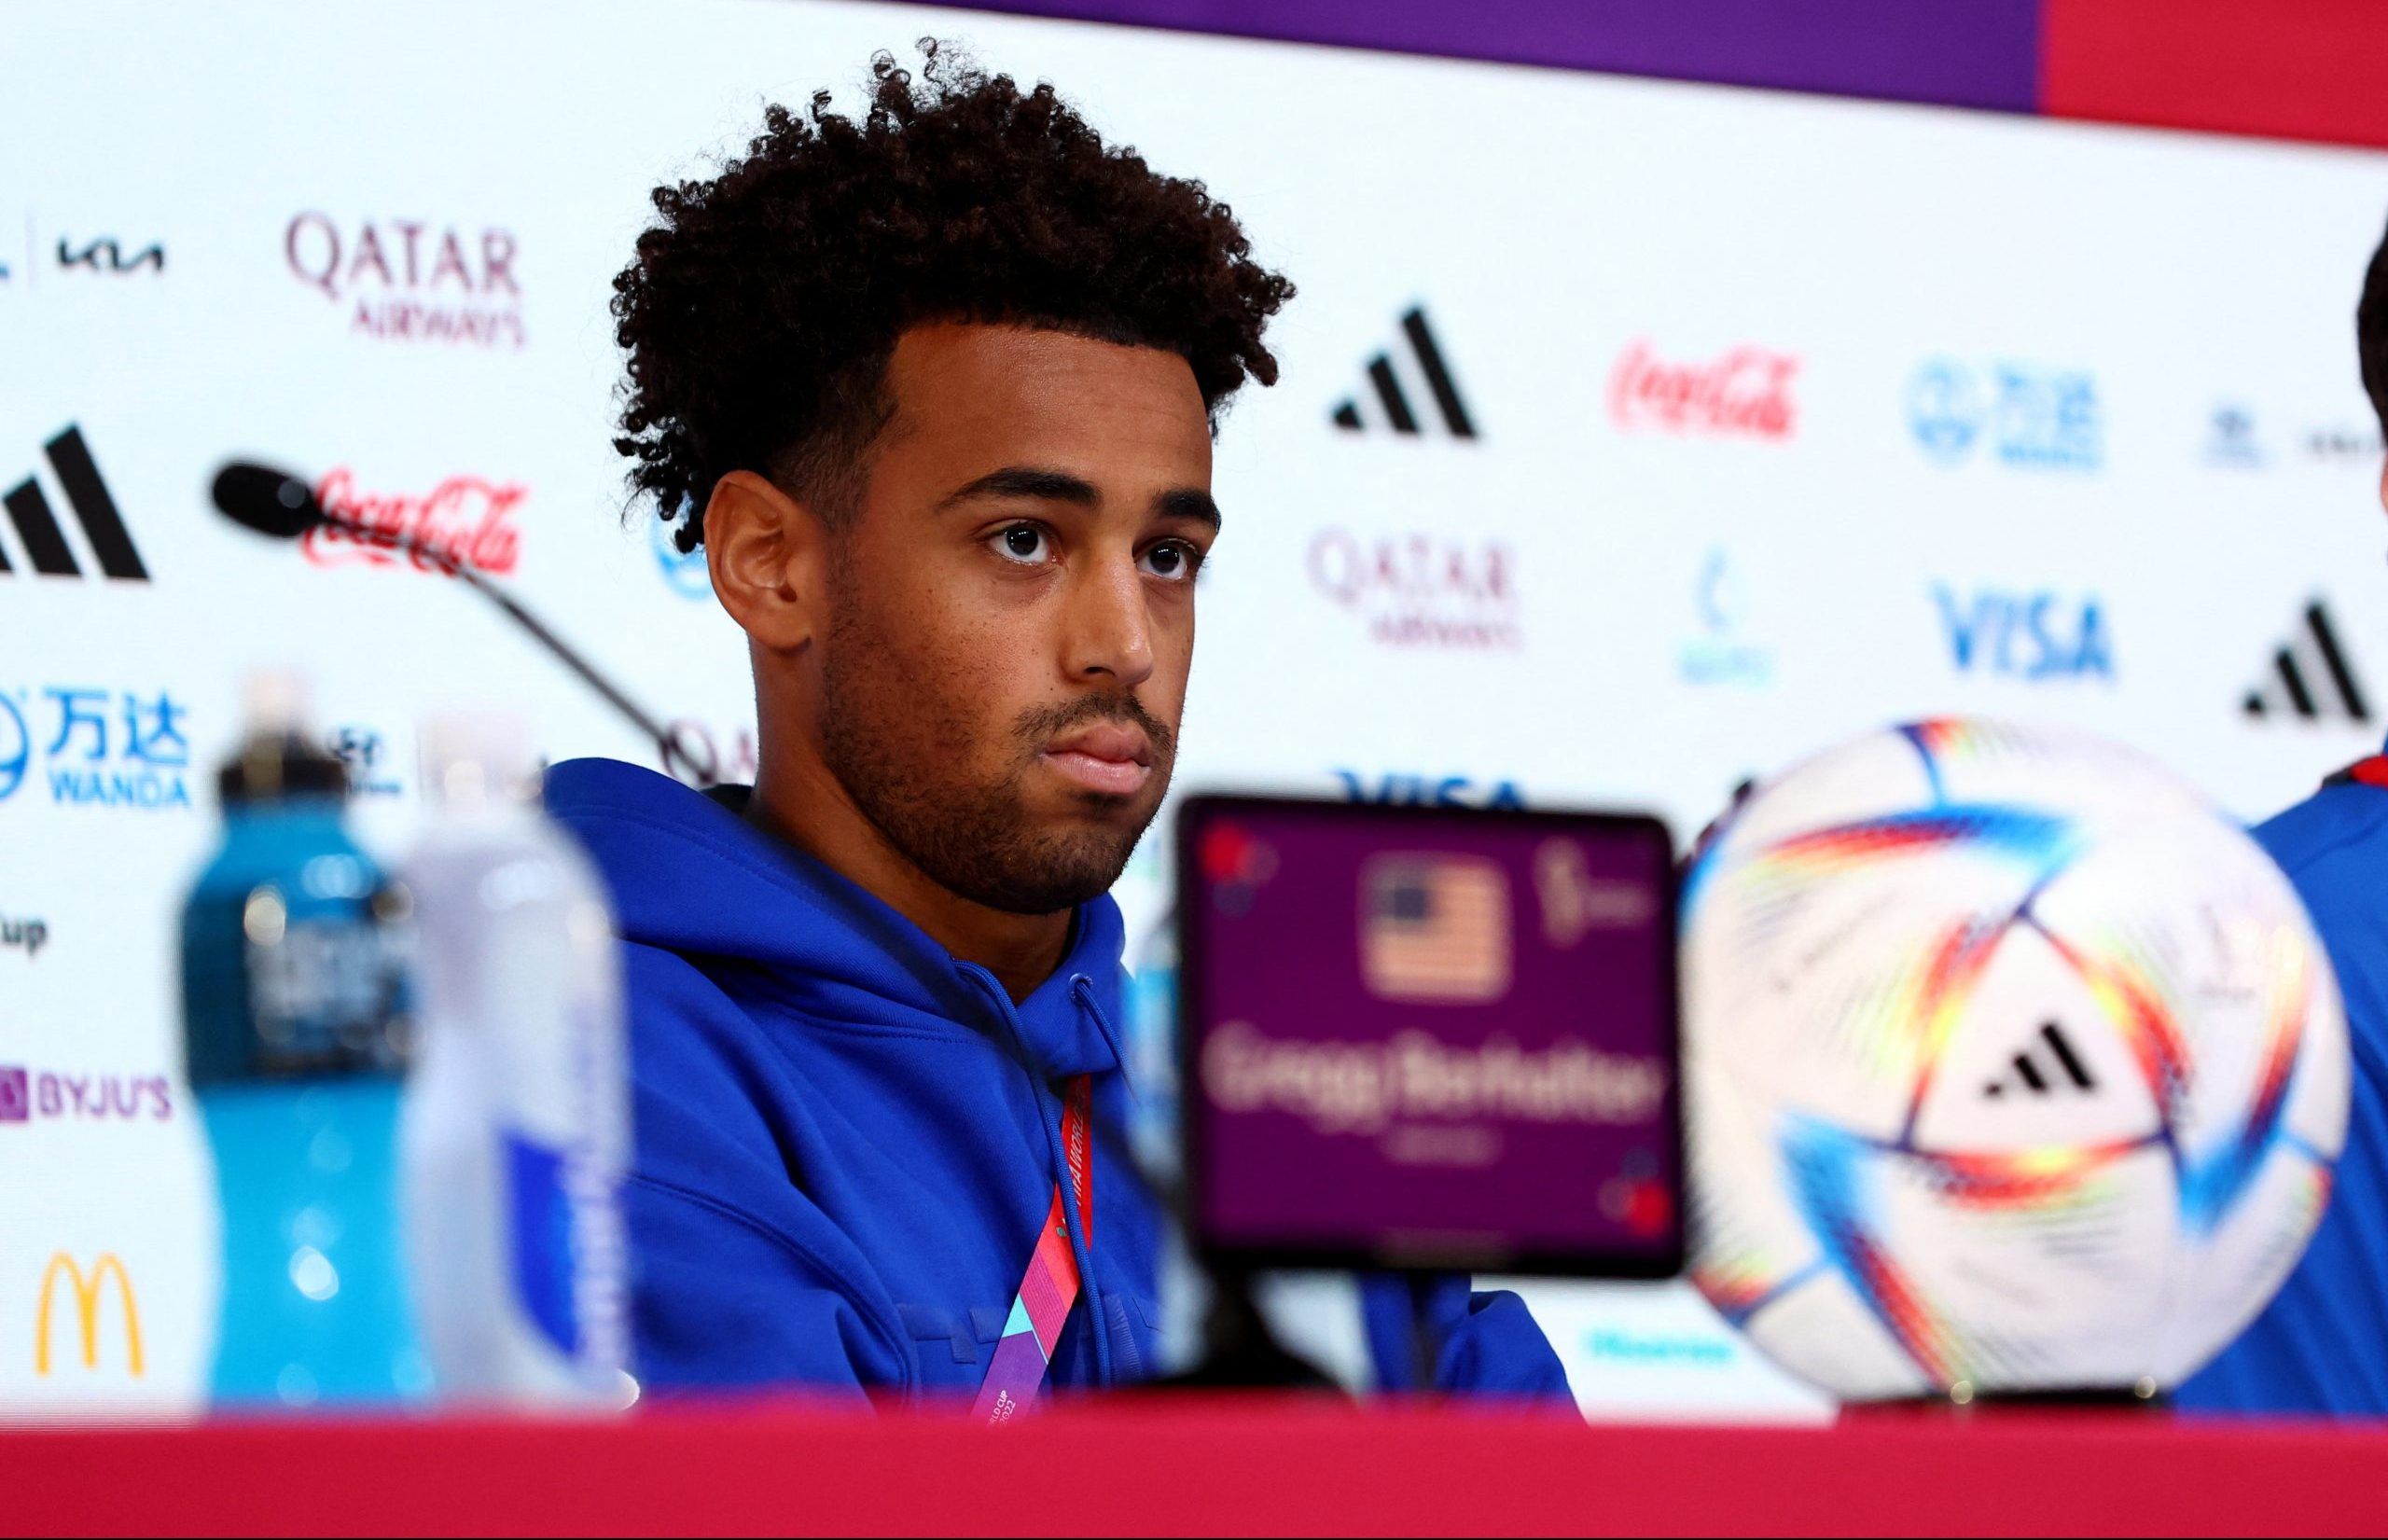 Leeds midfielder Tyler Adams of the U.S. during a press conference